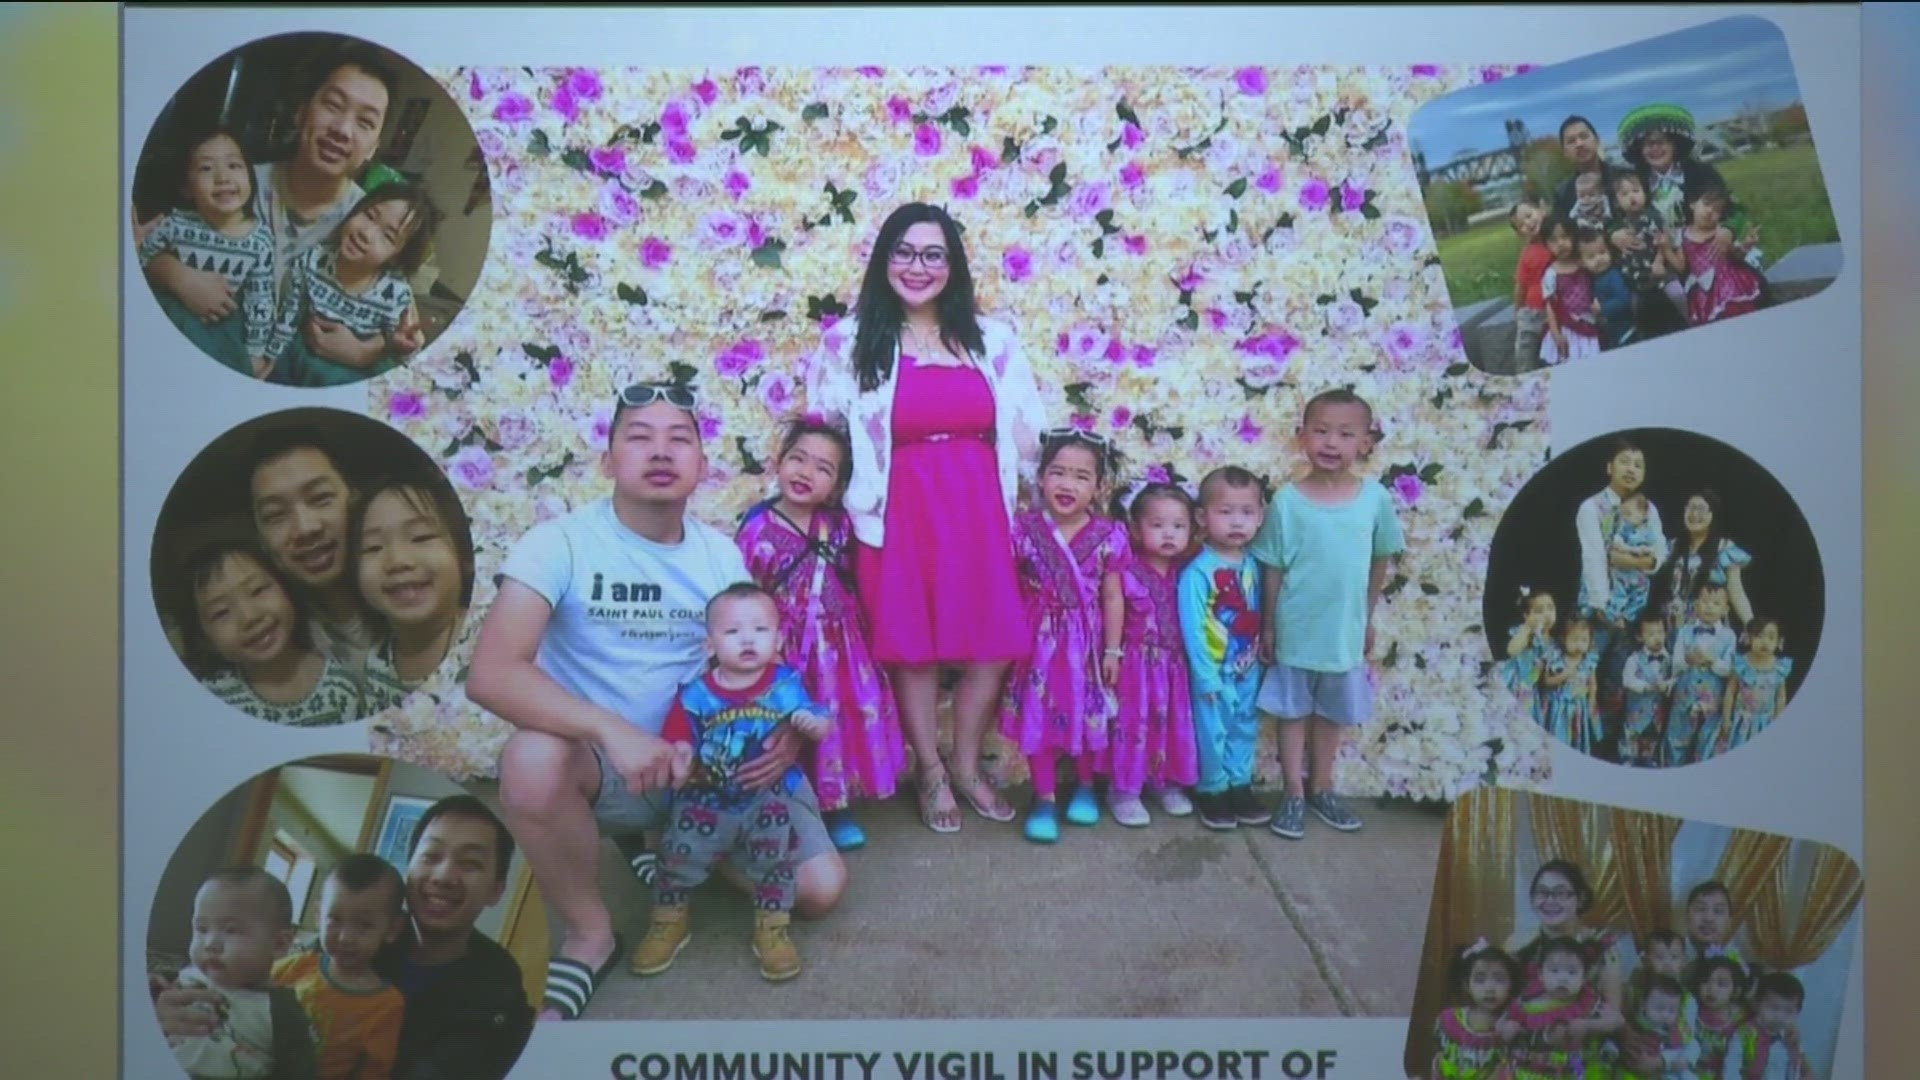 Crews pulled seven people from a burning house on Jan. 3, and on Saturday firefighters said they will donate $10,000 to the grieving family affected by that blaze.